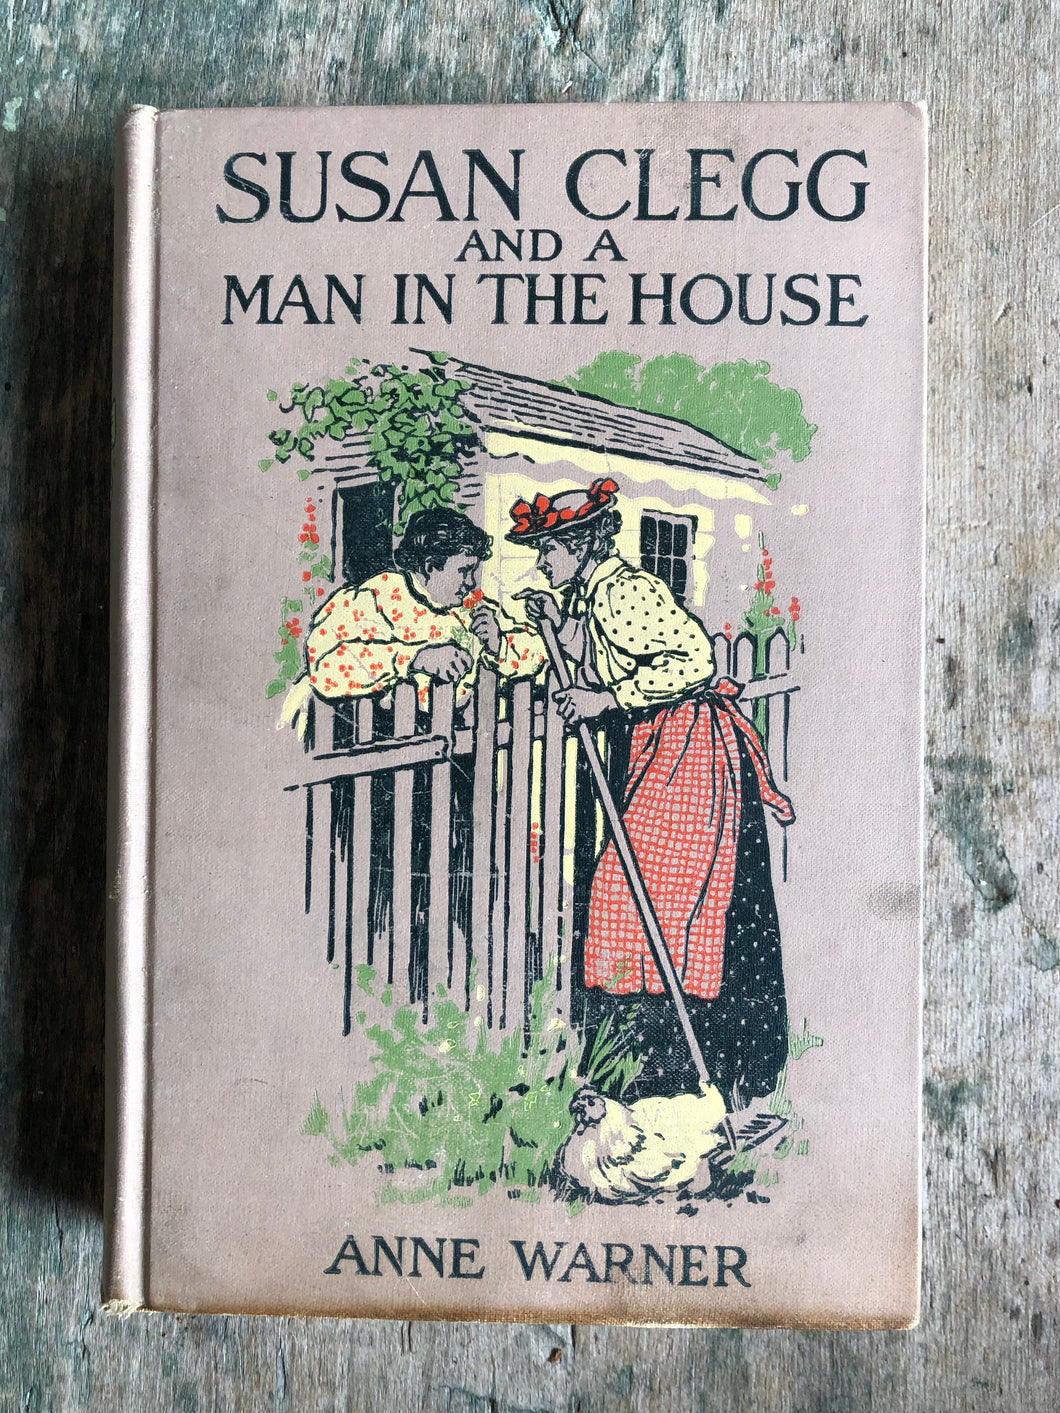 Susan Clegg and a Man in the House by Anne Warner